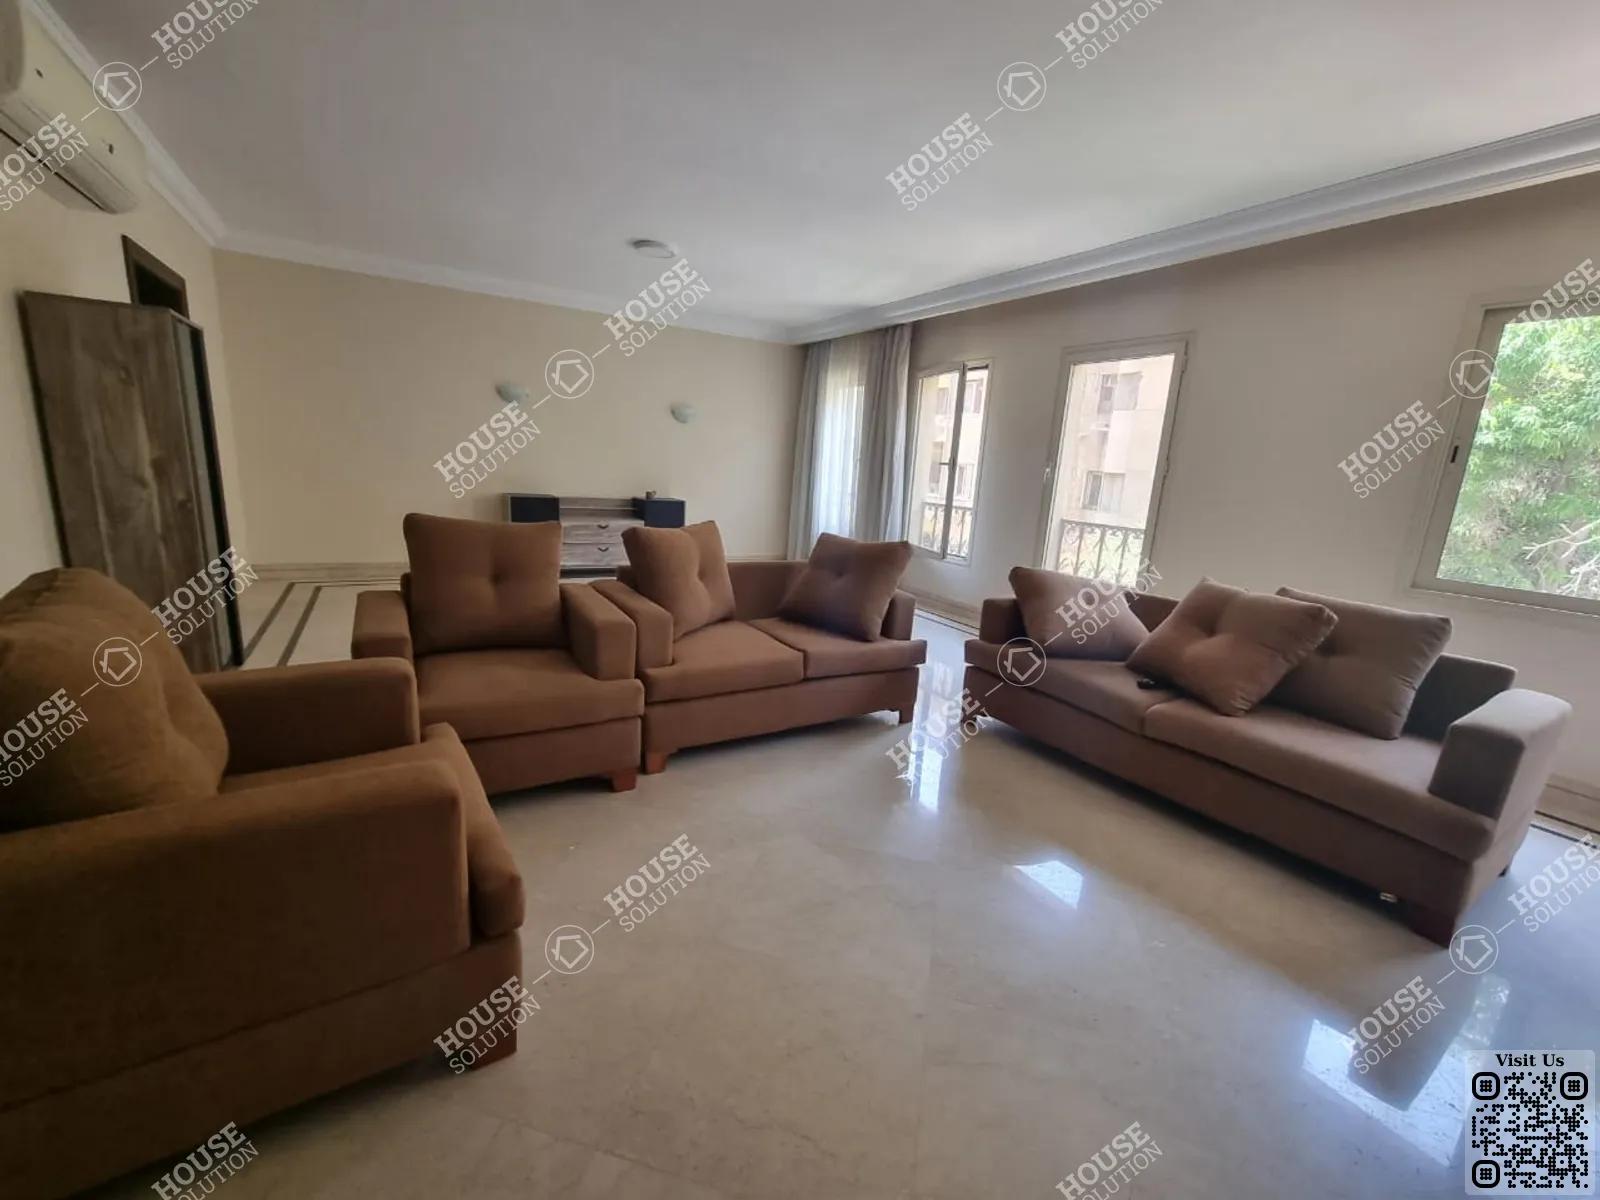 RECEPTION  @ Apartments For Rent In Maadi Maadi Sarayat Area: 220 m² consists of 3 Bedrooms 3 Bathrooms Modern furnished 5 stars #5674-0